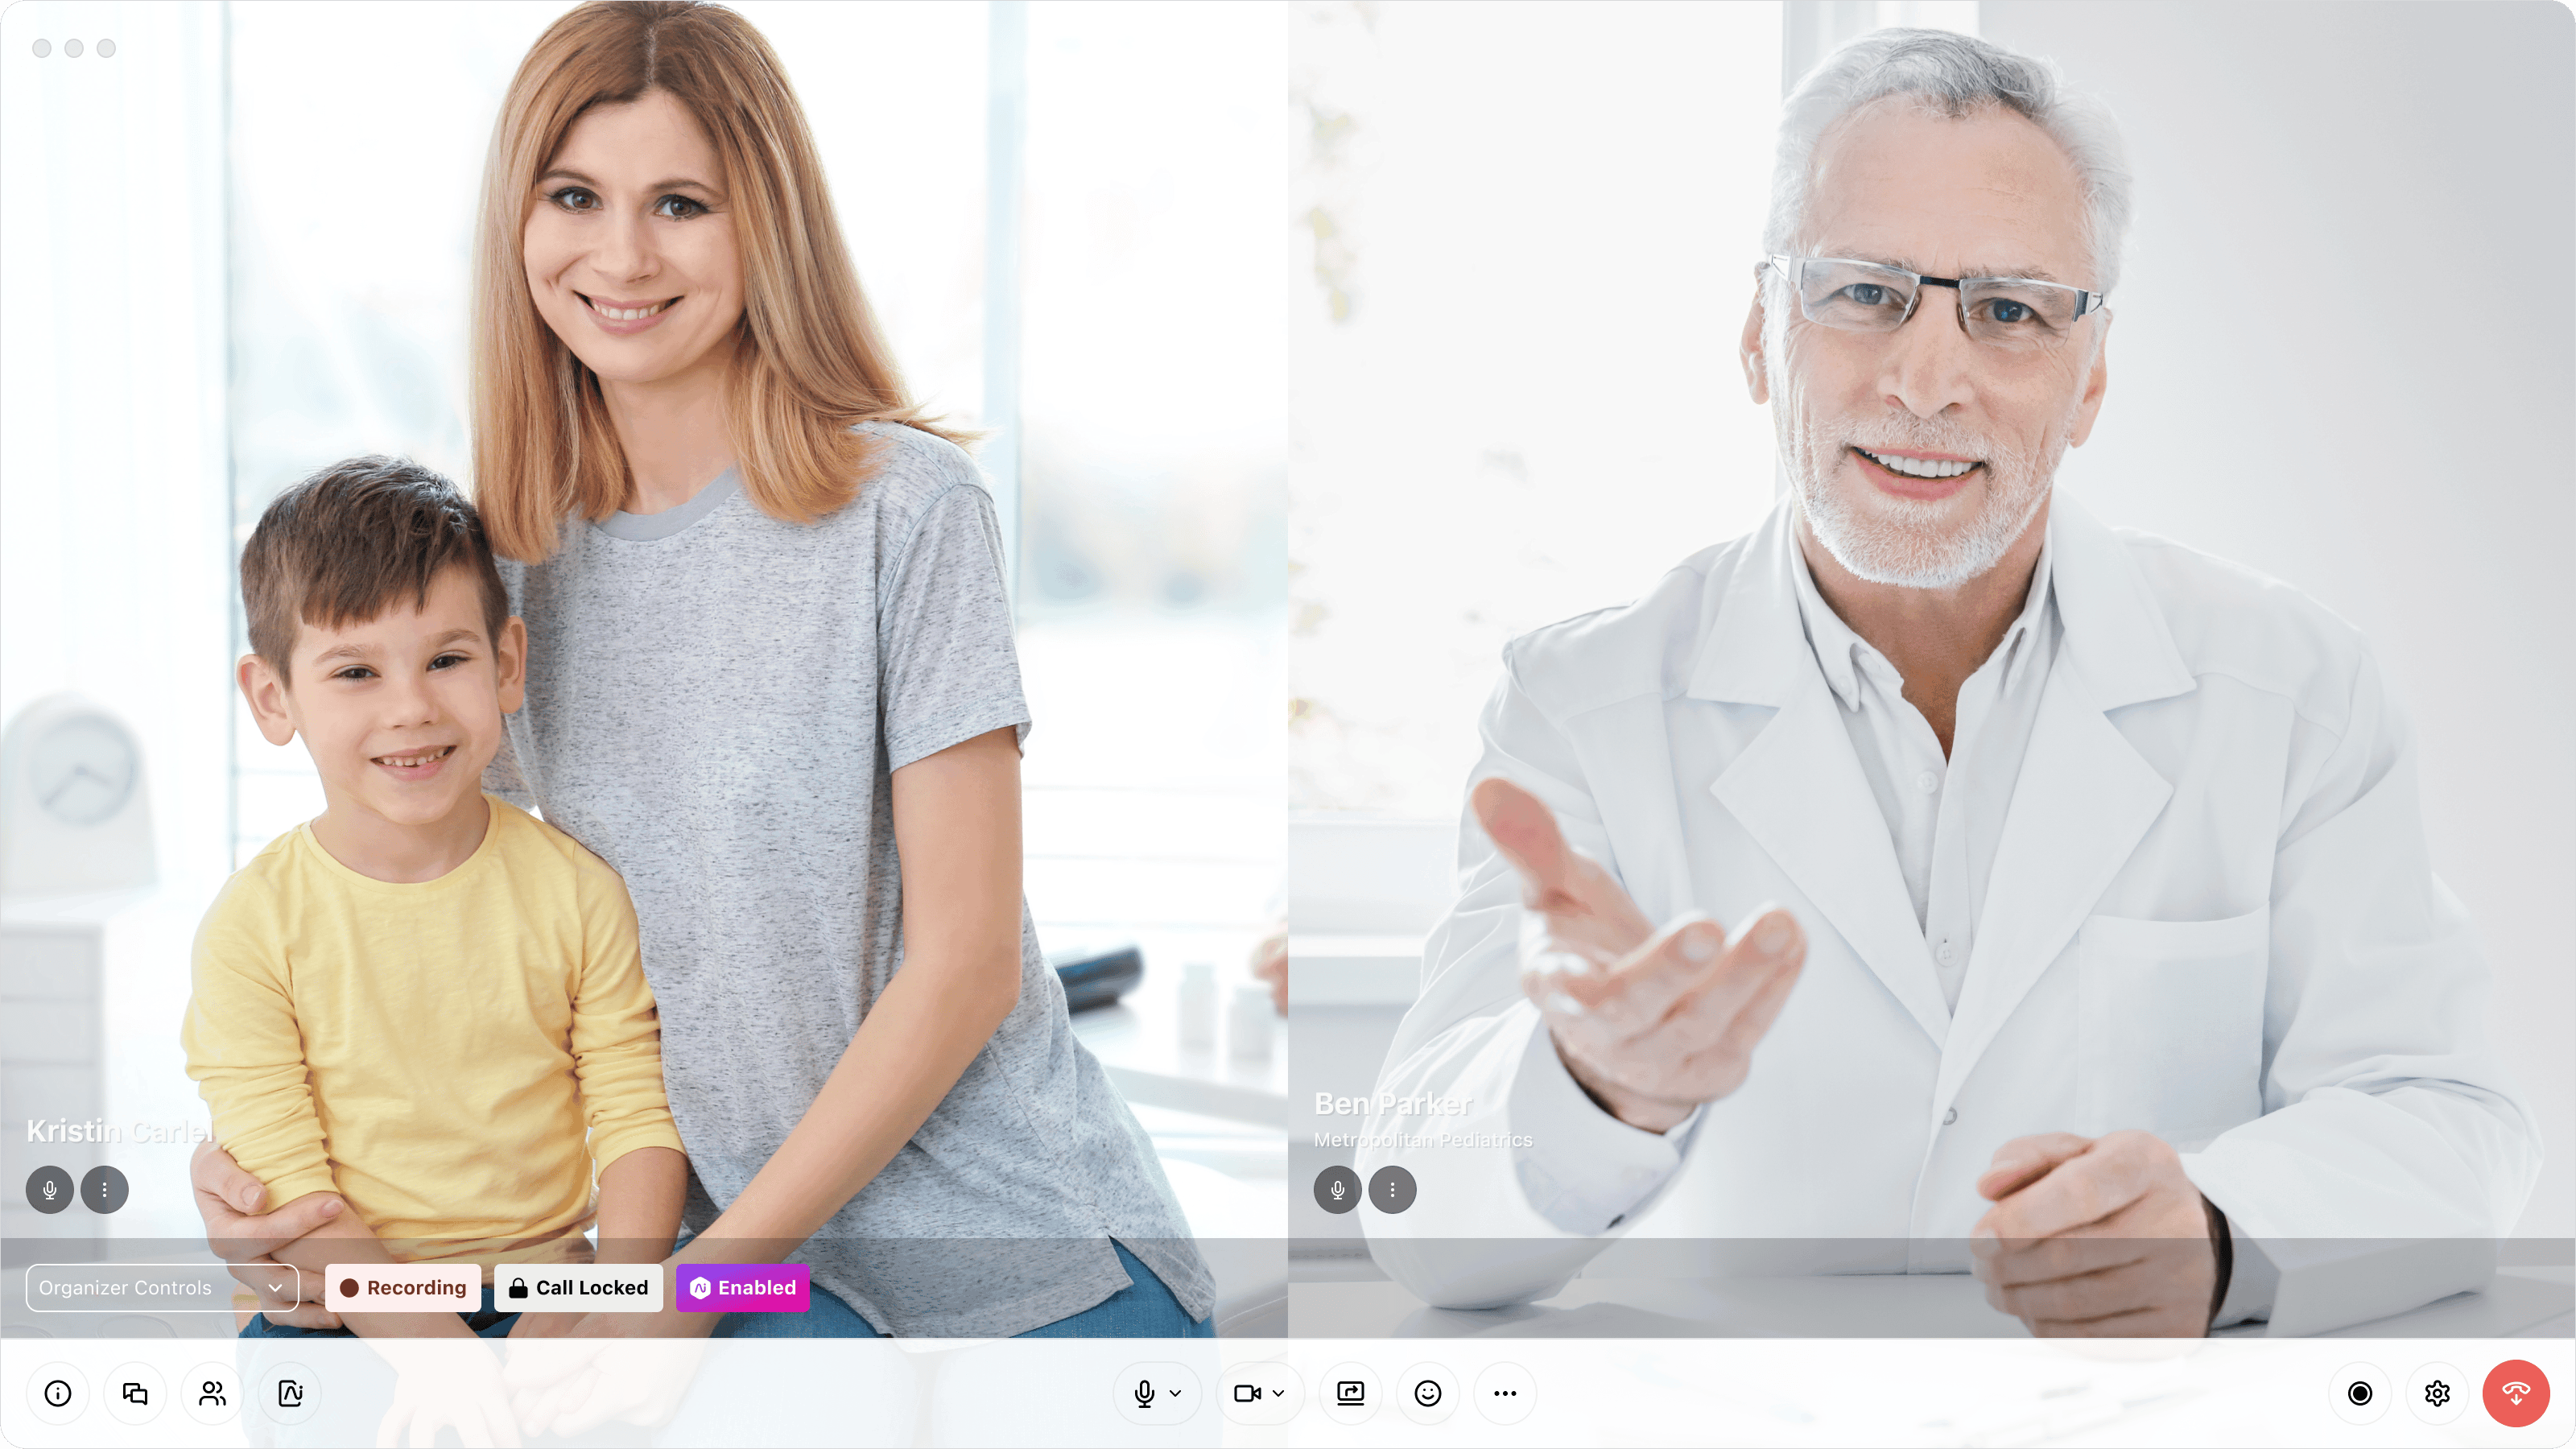 Teleconsultation between a healthcare professional and a patient